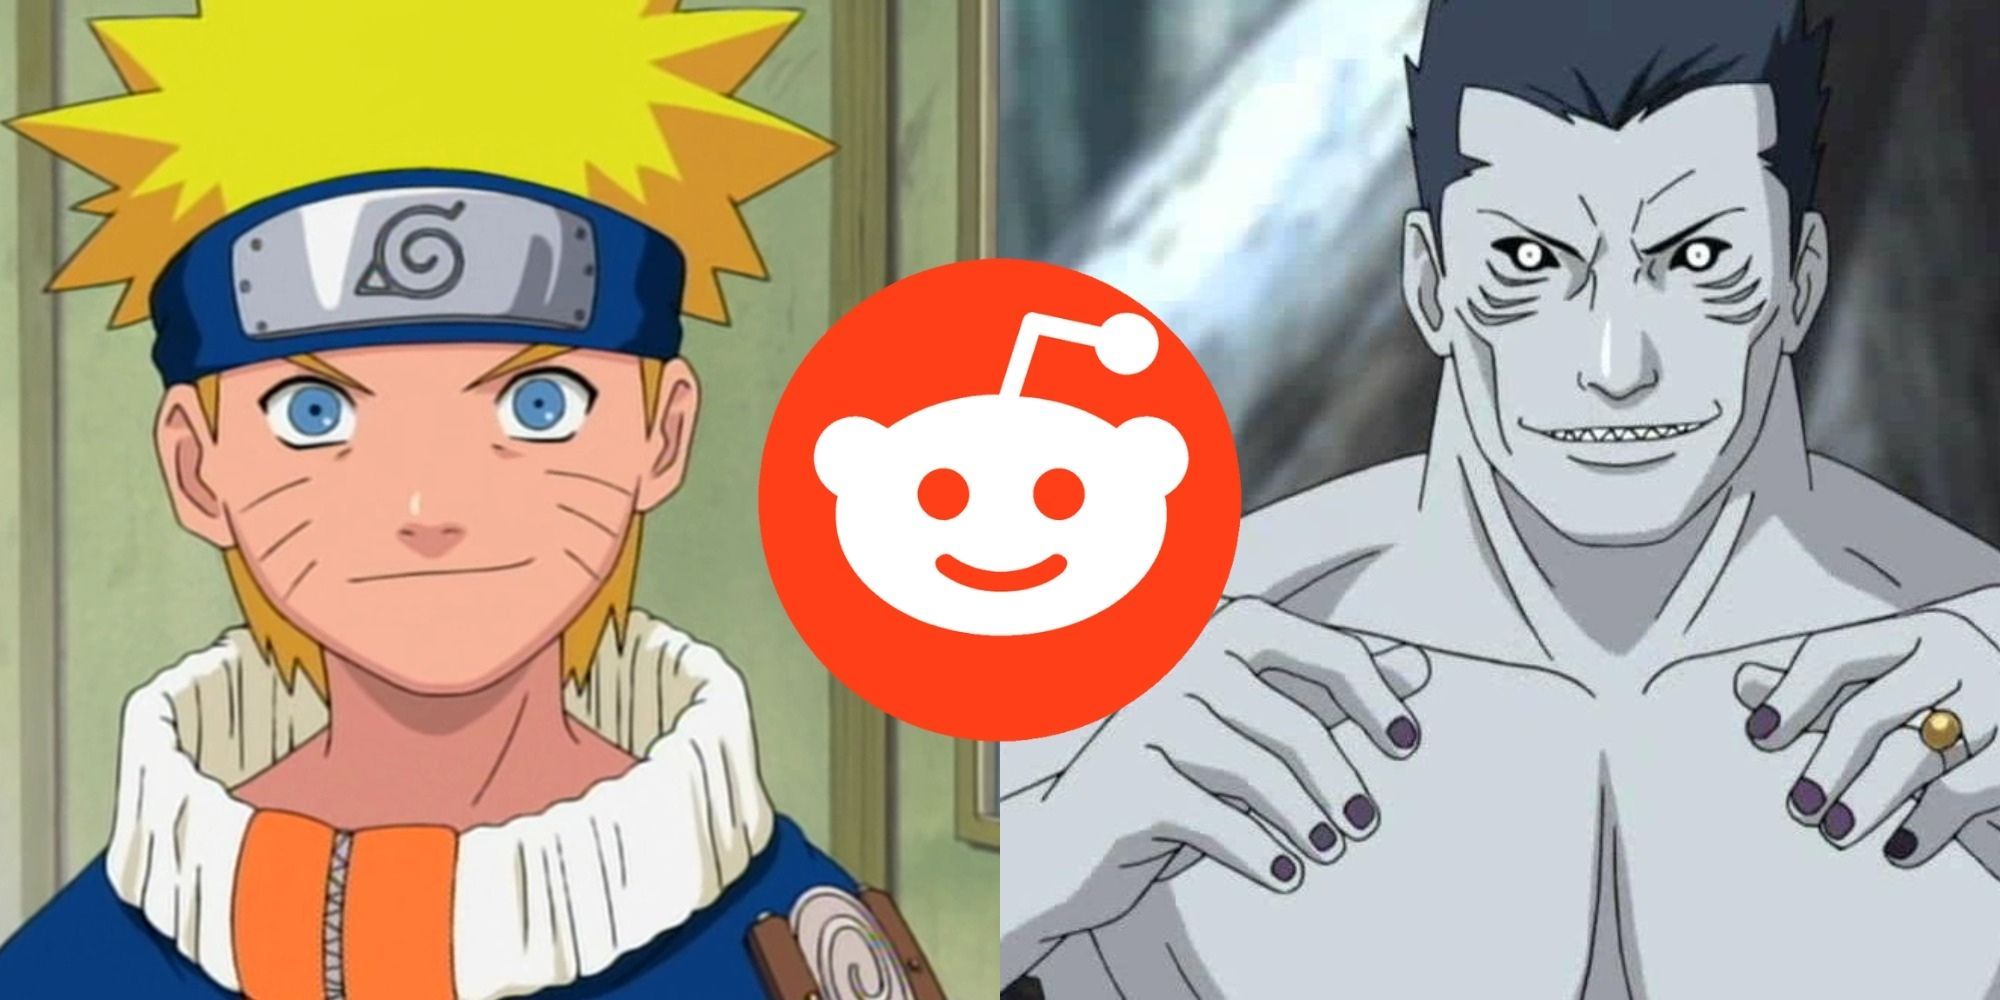 Naruto Online - Naruto has grown from a boy disliked by